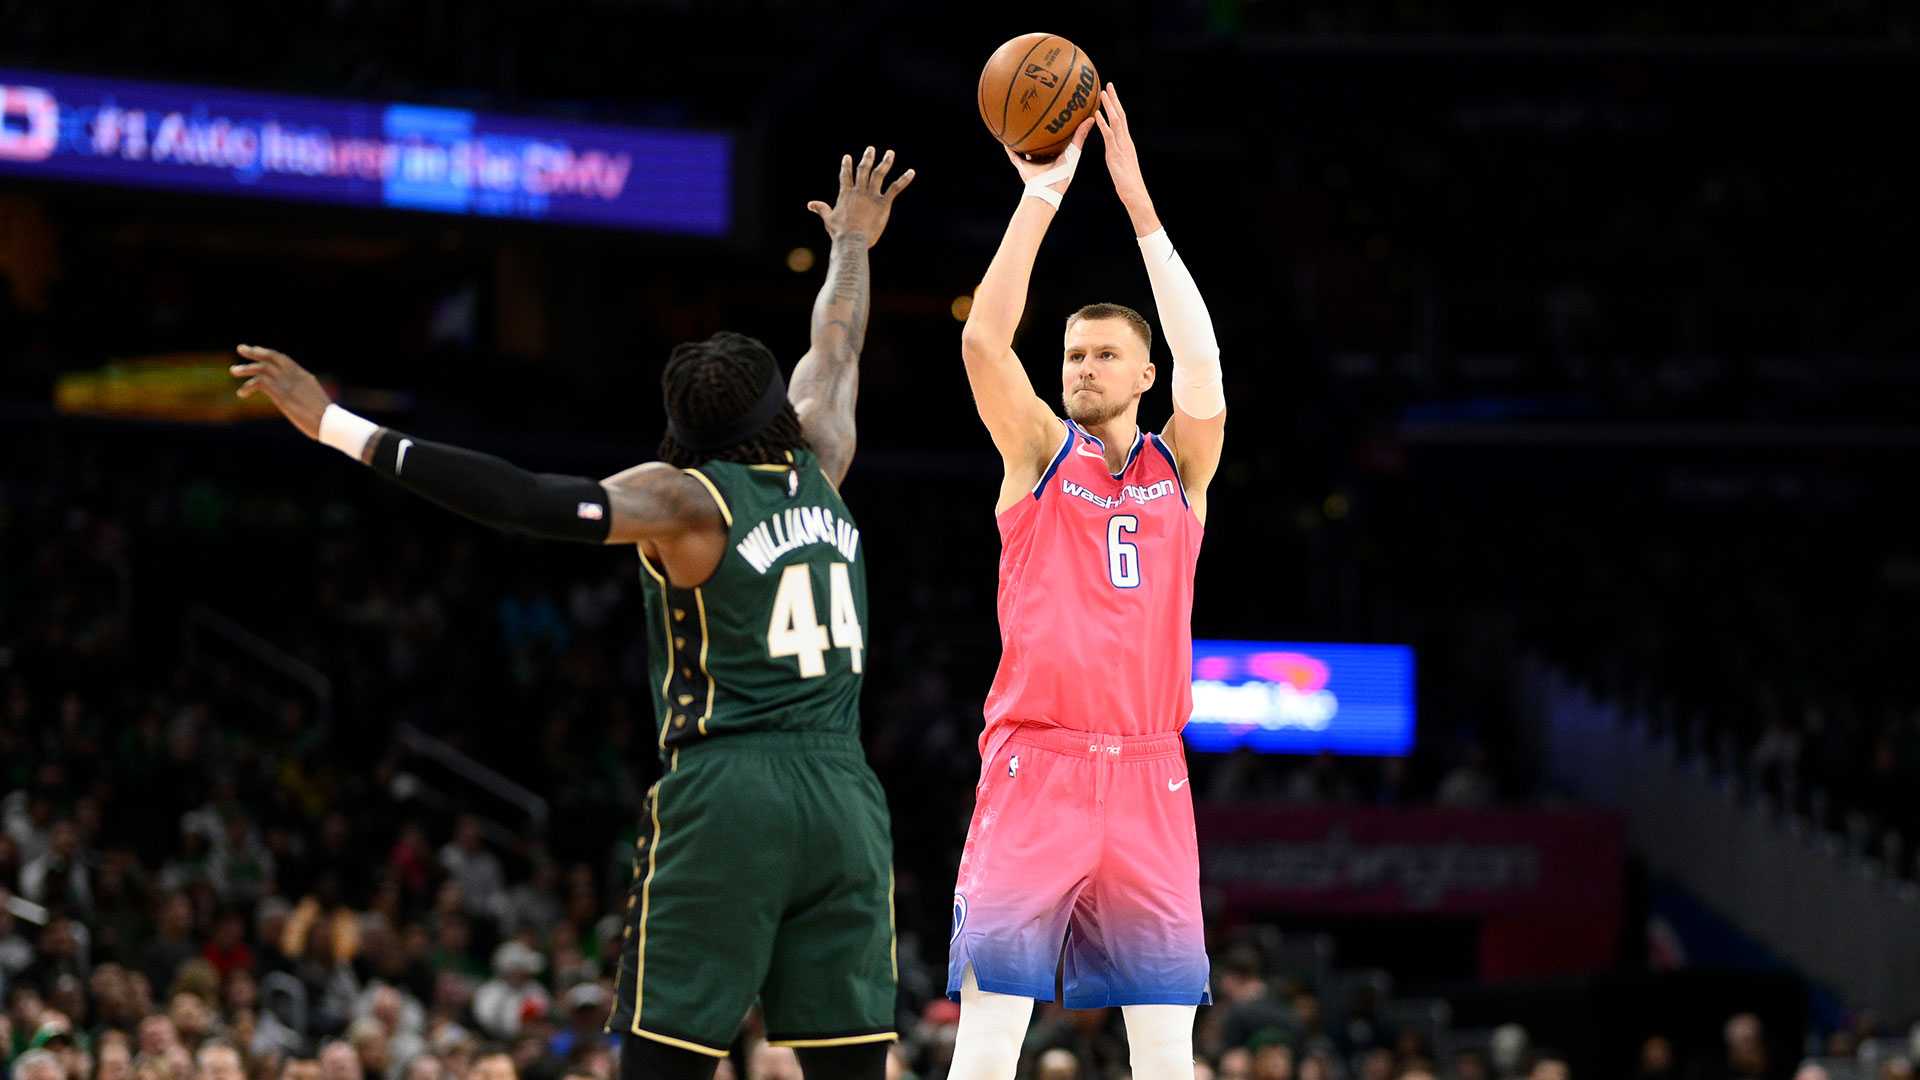 Celtics acquire Kristaps Porzingis from Wizards in revamped deal